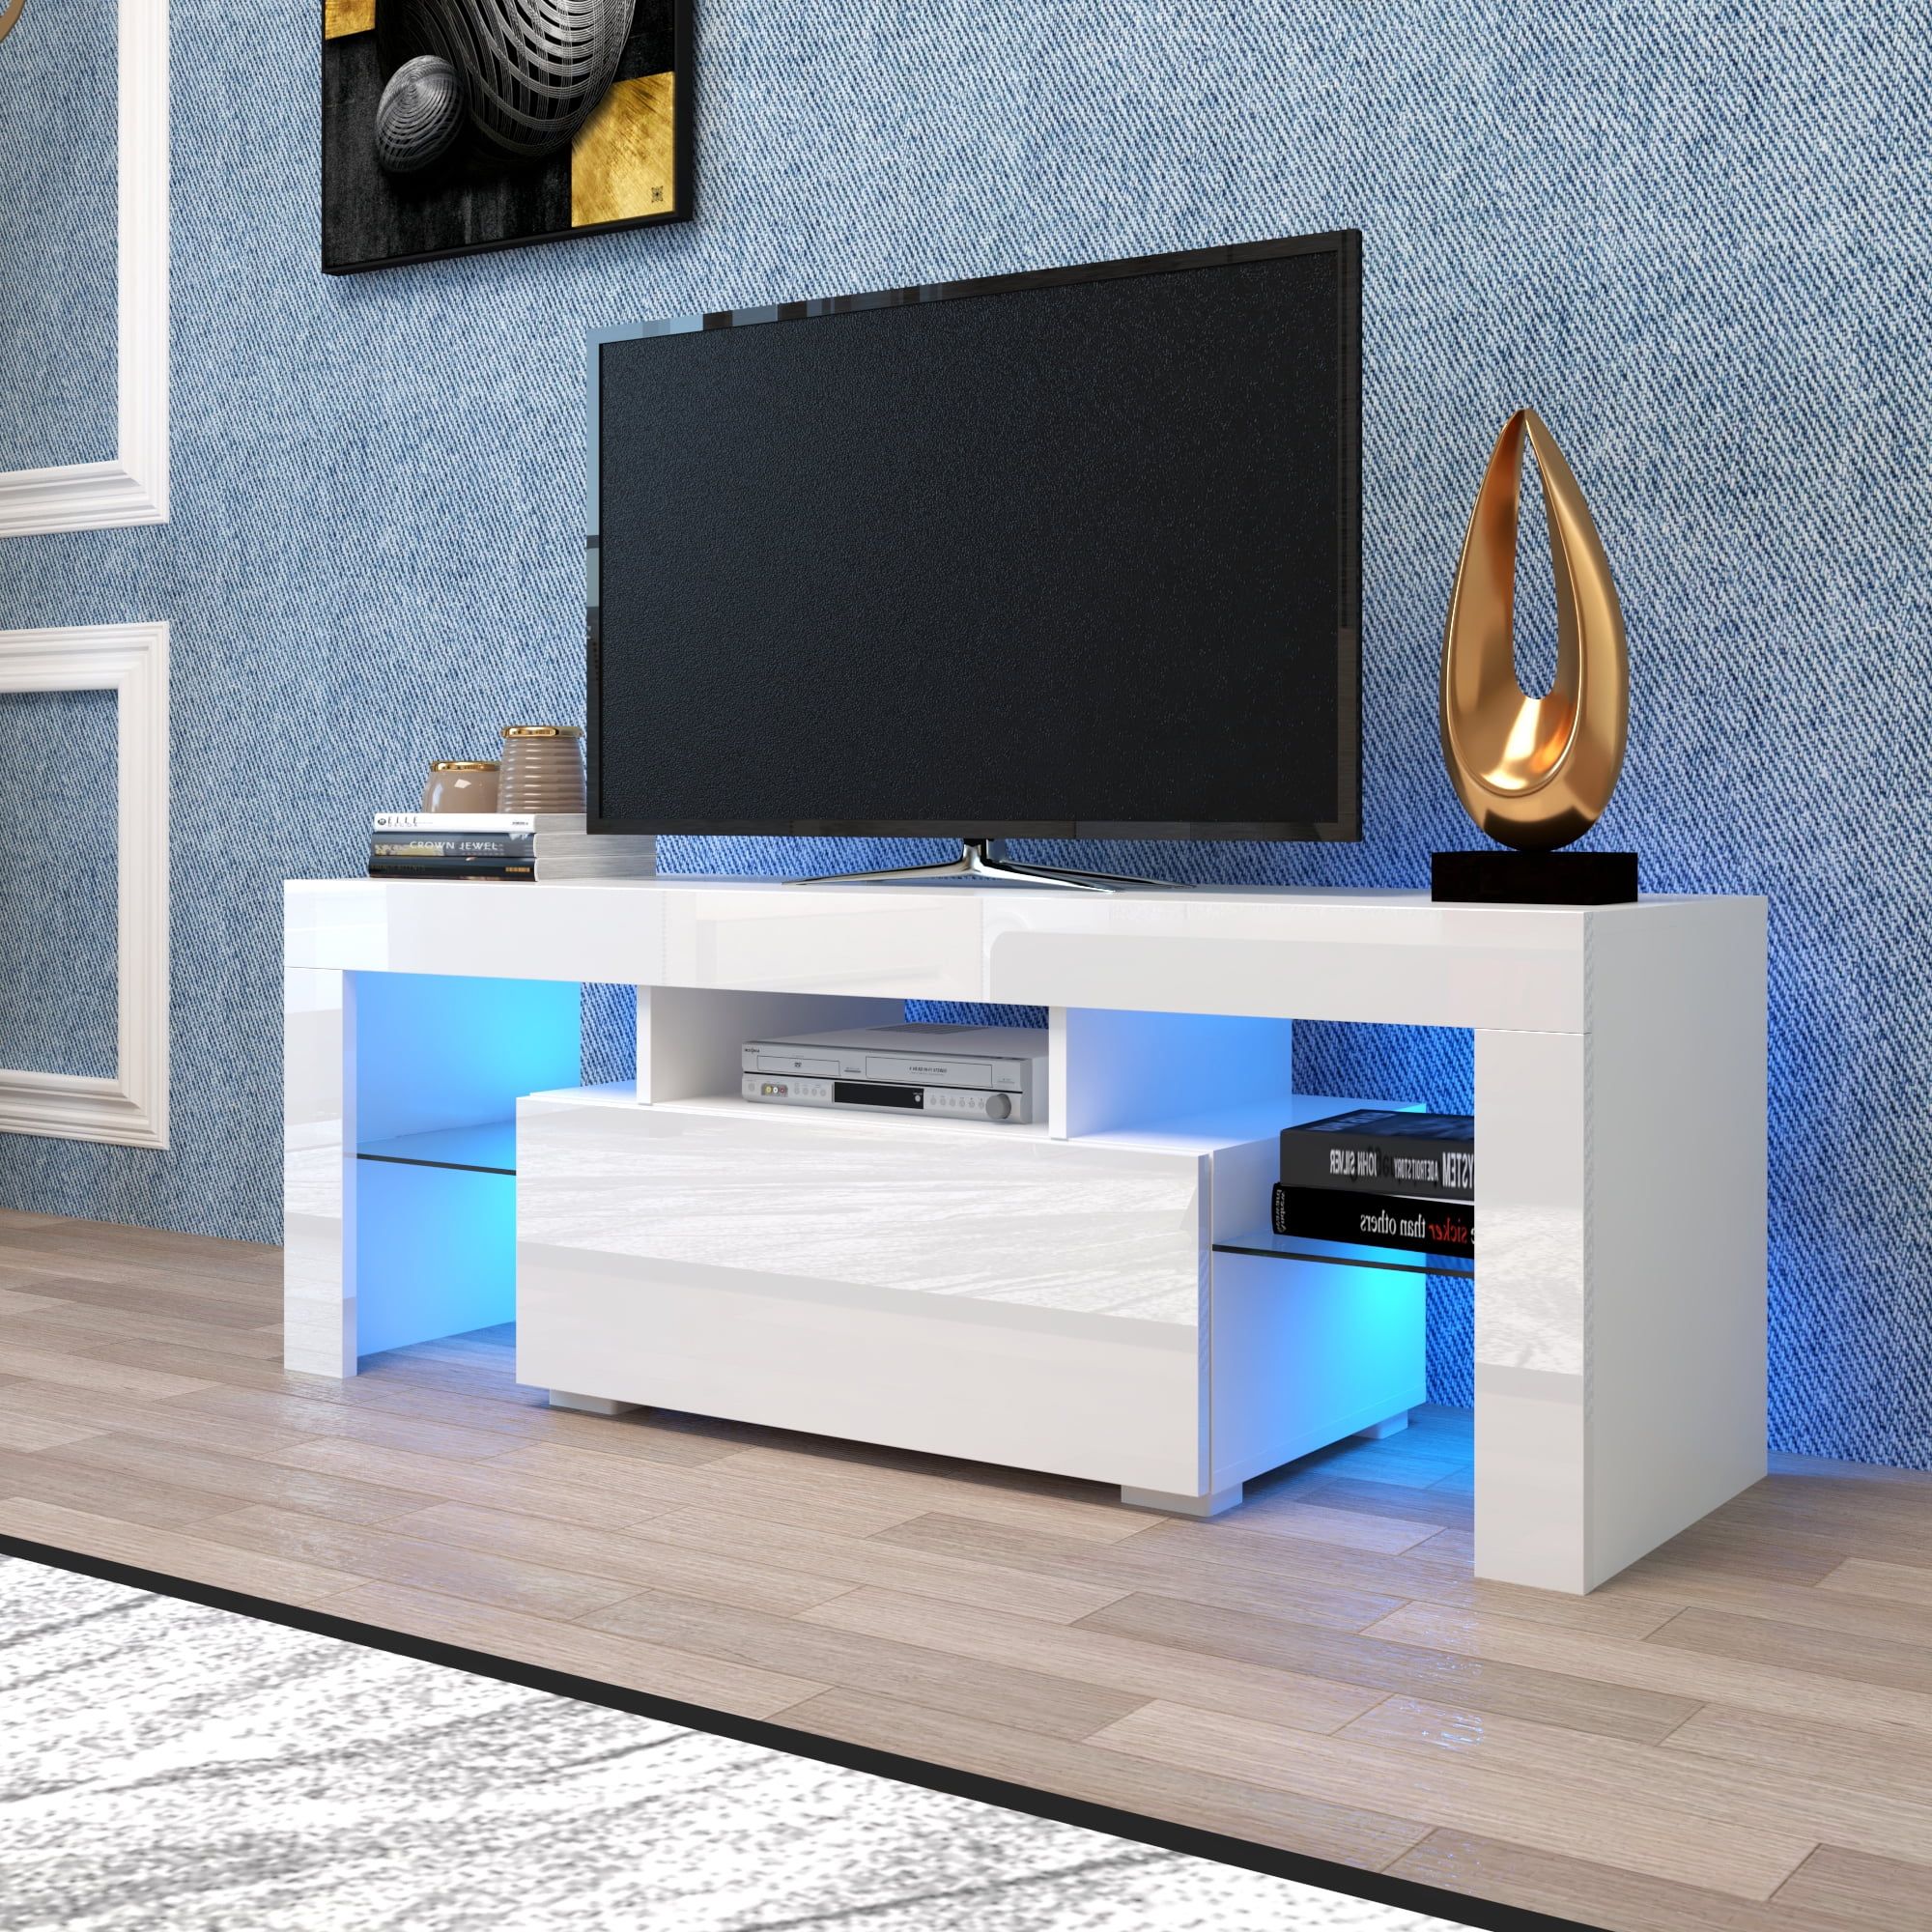 Nestfair White Tv Stand With Led Lights For Tvs Up To 55 Inches For Tv Stands With Led Lights & Power Outlet (View 15 of 20)